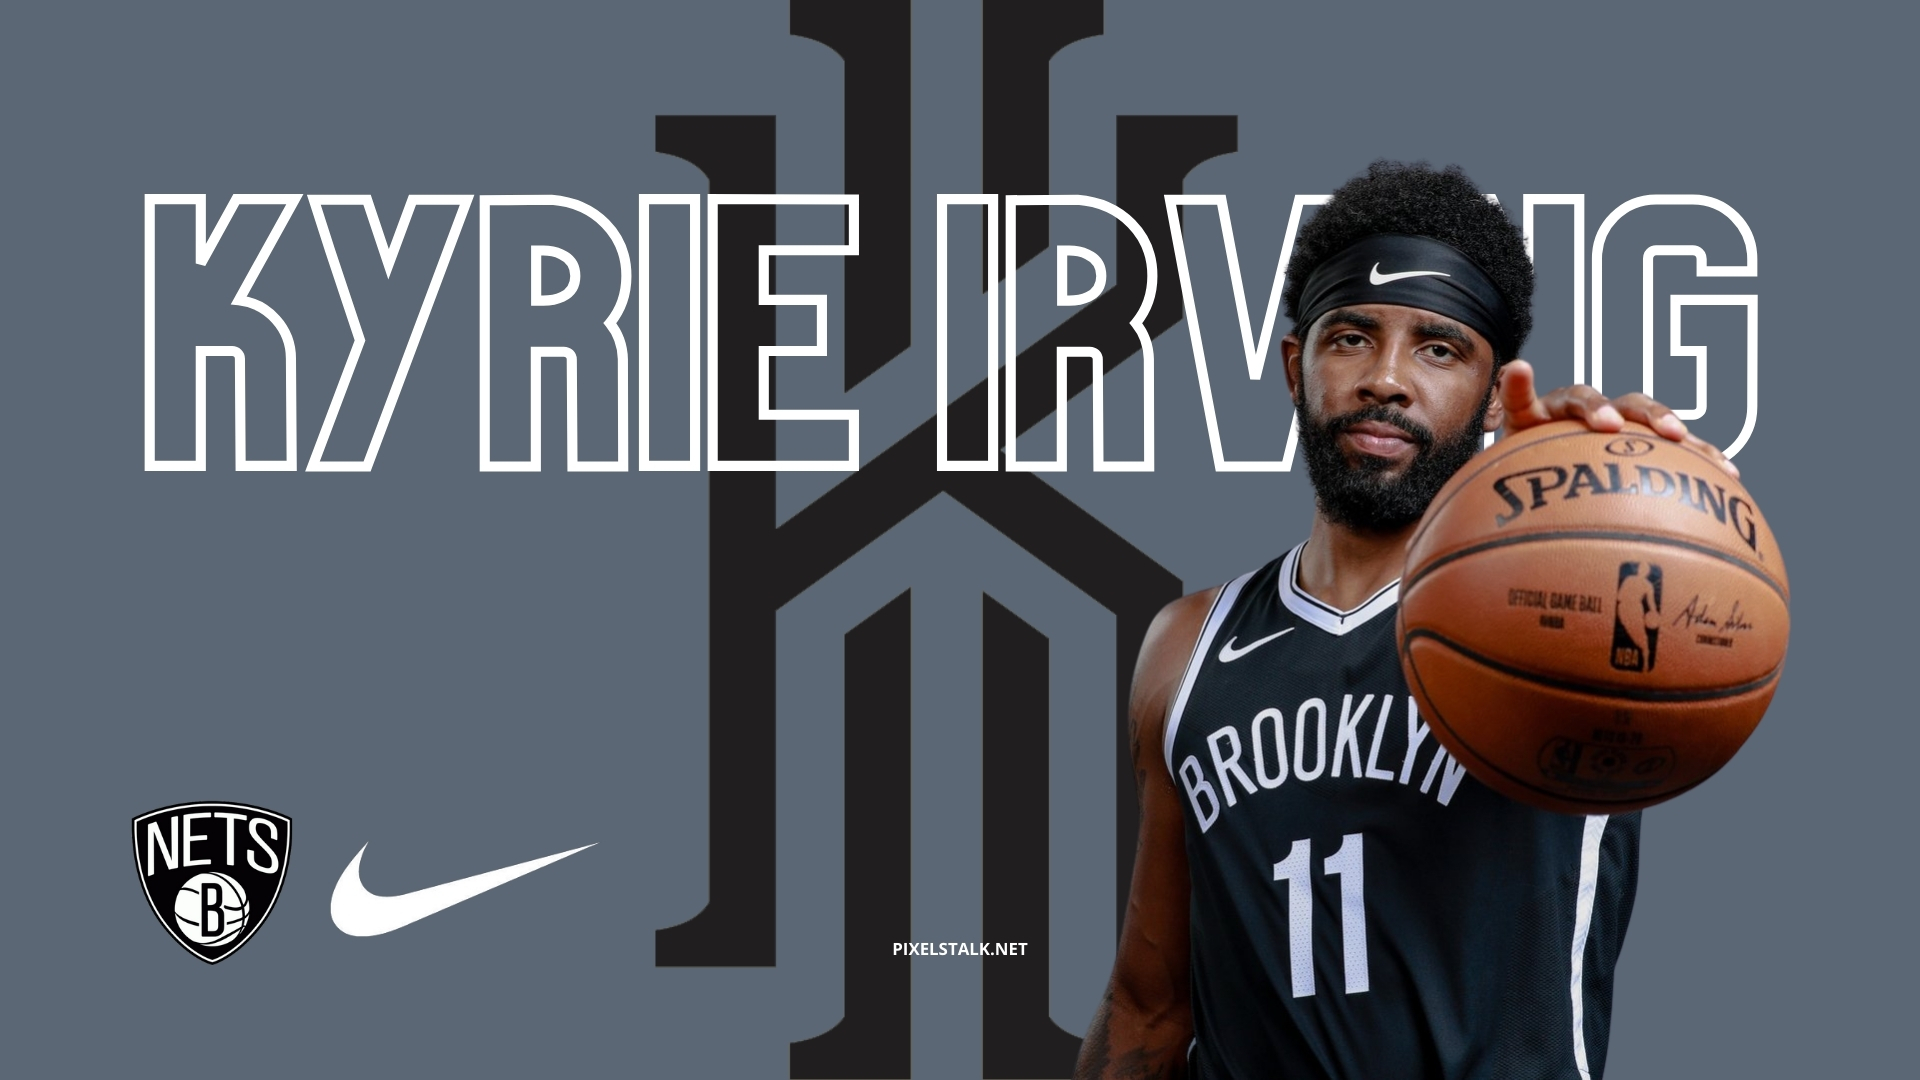 Kyrie Irving Wallpapers HD Free download